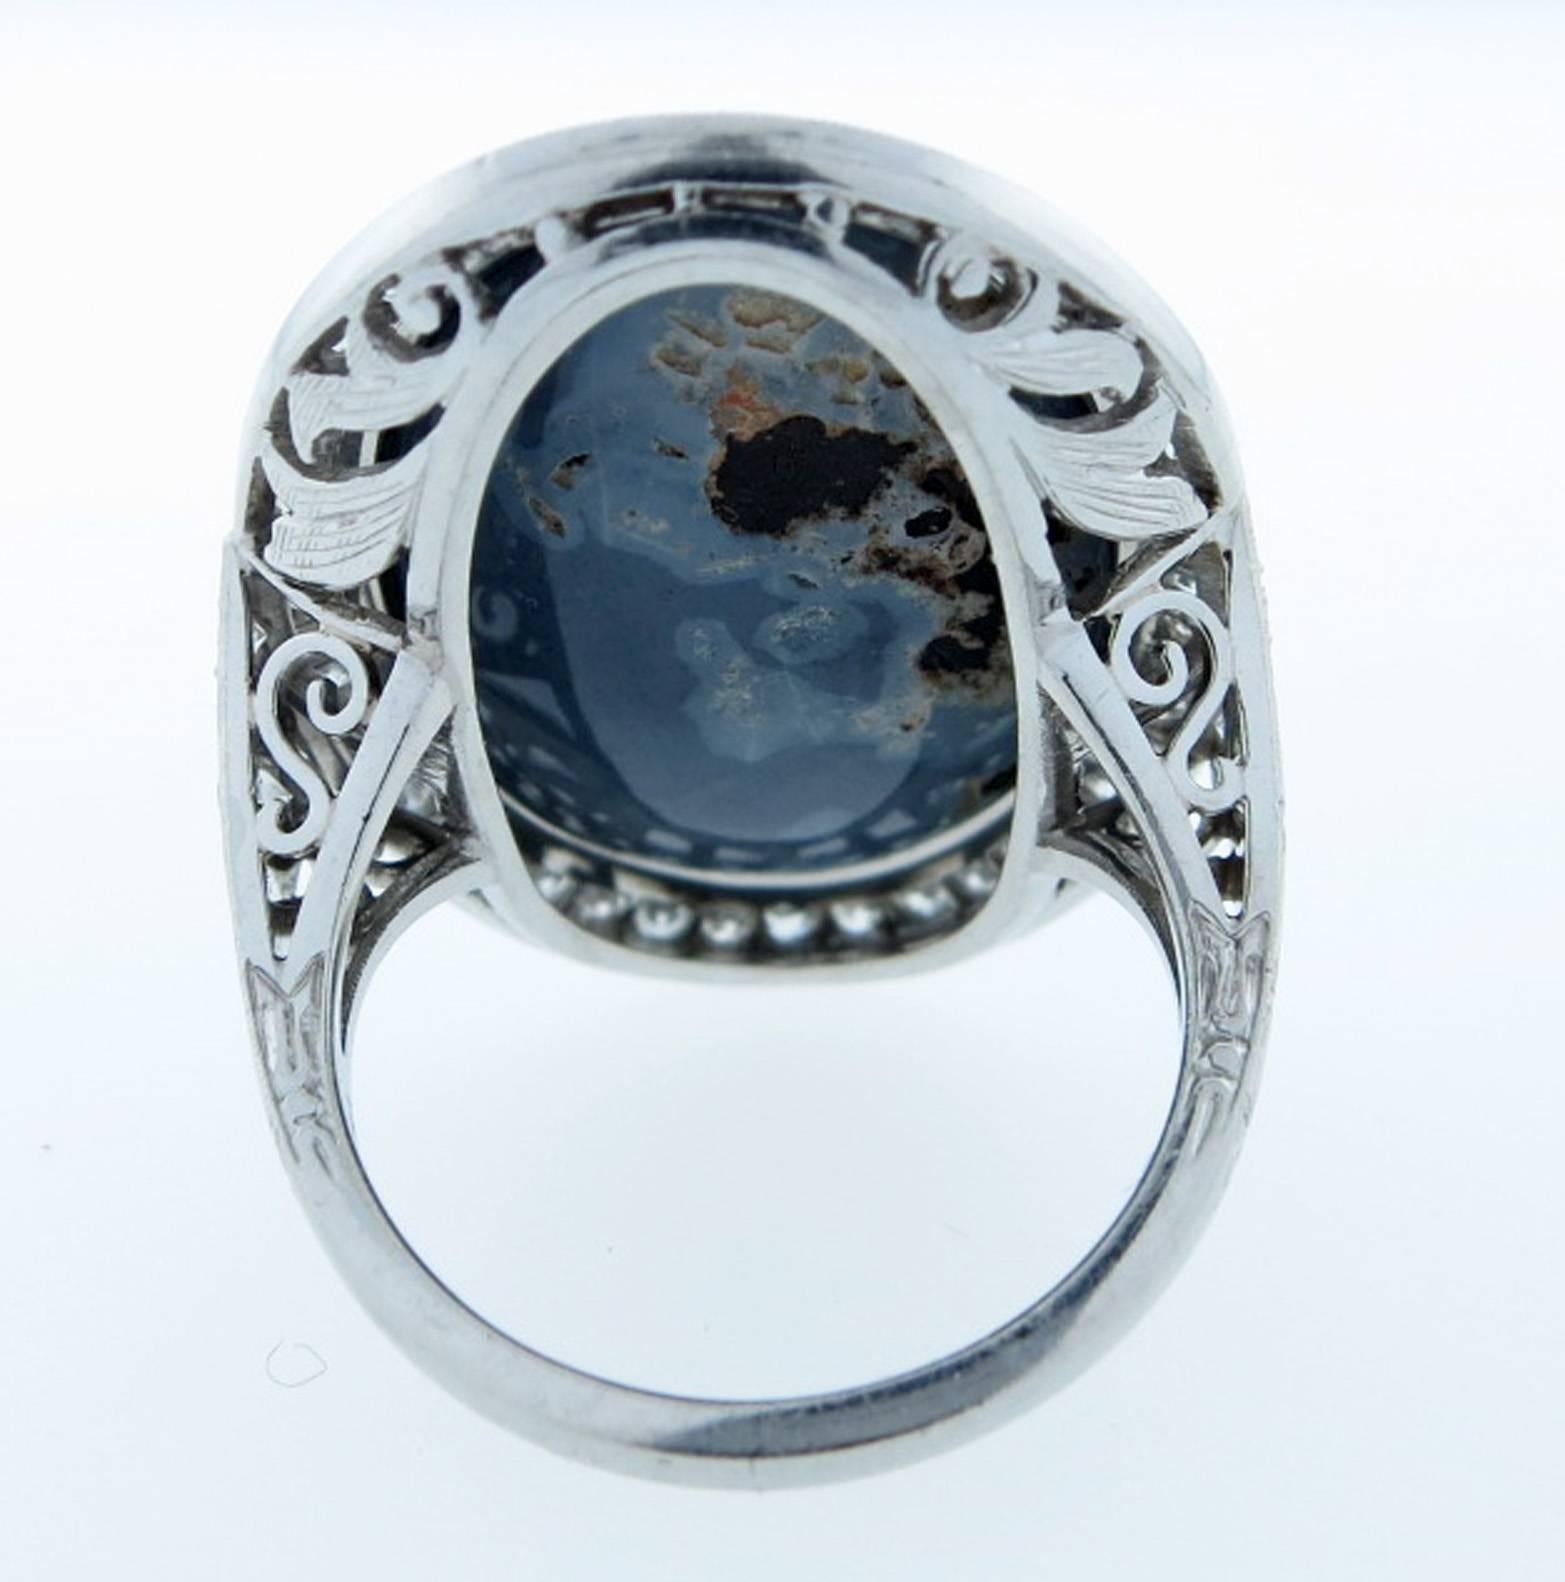 Handmade platinum mount bezel set black opal center measuring approx 23. mm. x 15.5mm. x 5.0mm. weighing approx 9 1/2 cts. surrounded by 44 bead set round old cut diamonds totaling approx .50cts. The open work engraved mount is bead set with 3 round